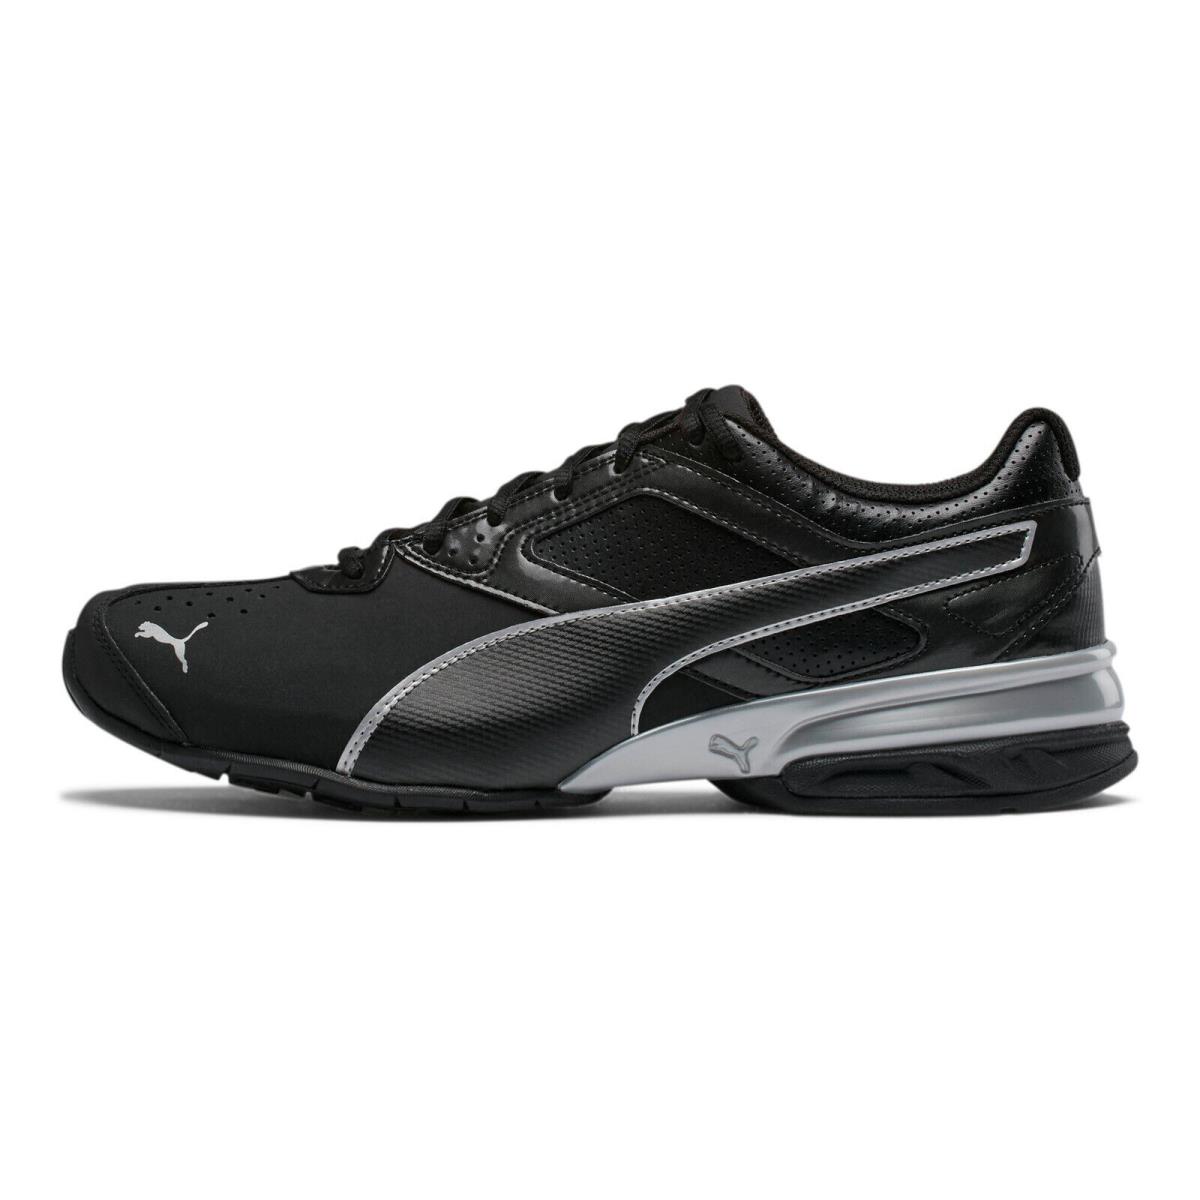 Puma Tazon 6 FM 18987303 Mens Black Leather Lace Up Athletic Running Shoes - Black